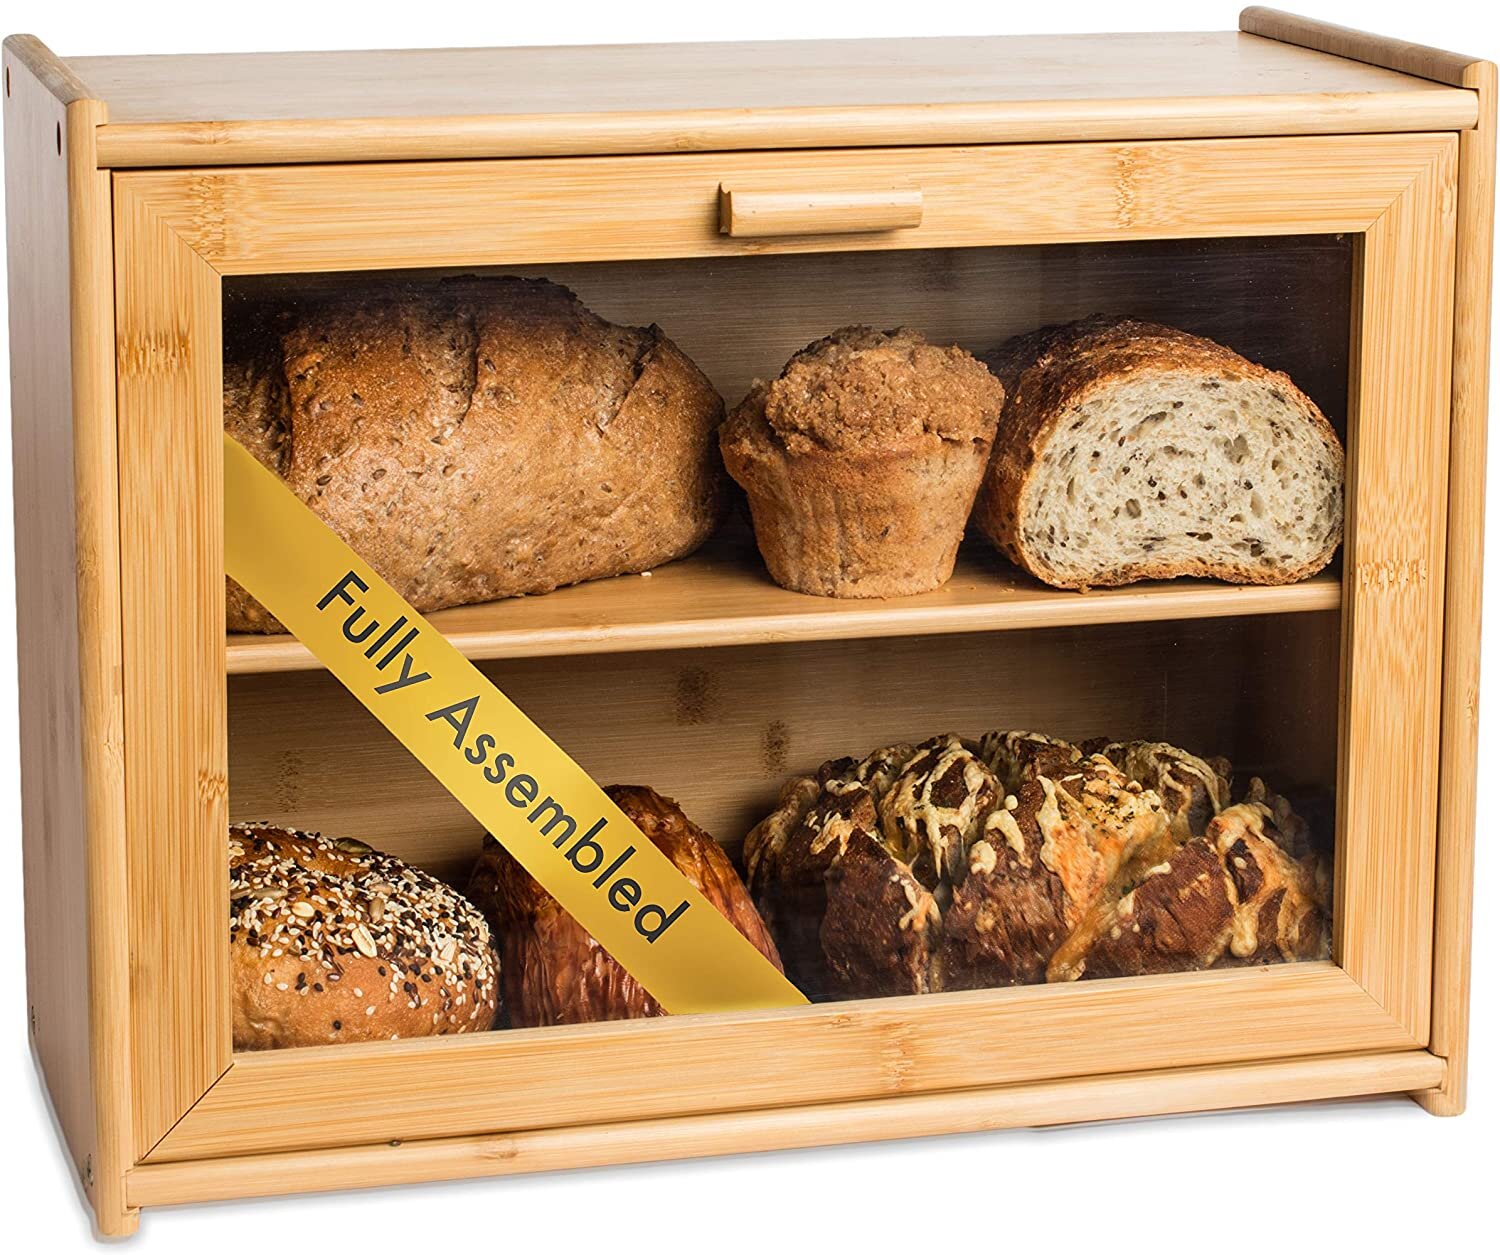 Foundry Select Bamboo Corner Bread Box With Shelf & Reviews